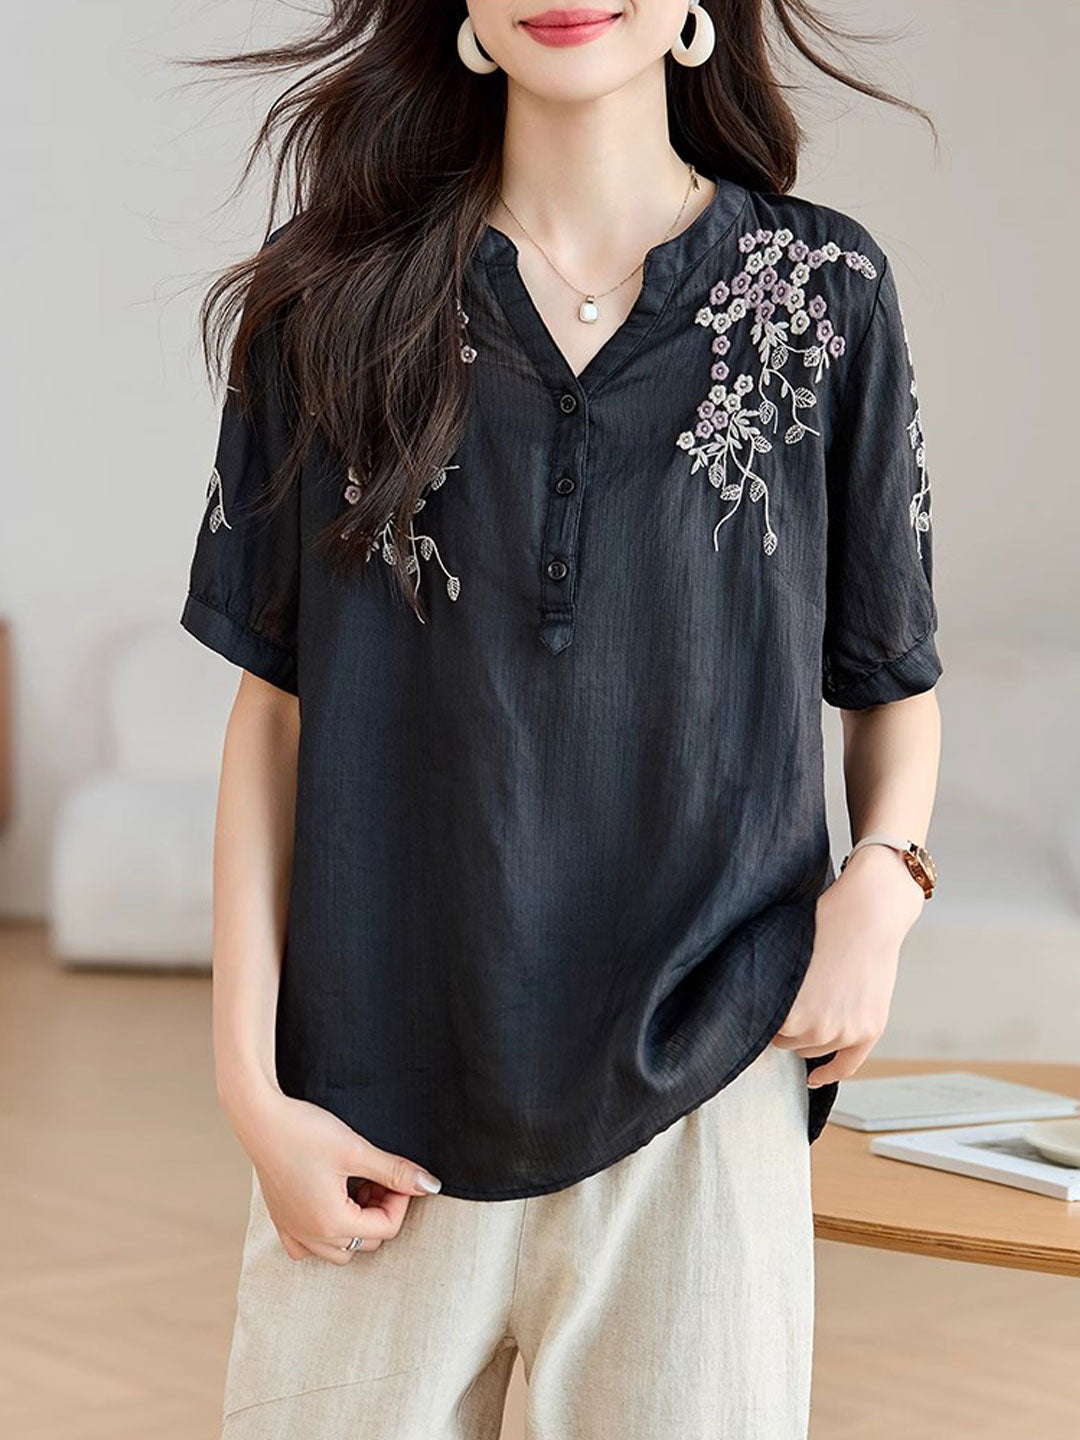 Sarah Classic V-Neck Embroidered Printed Top